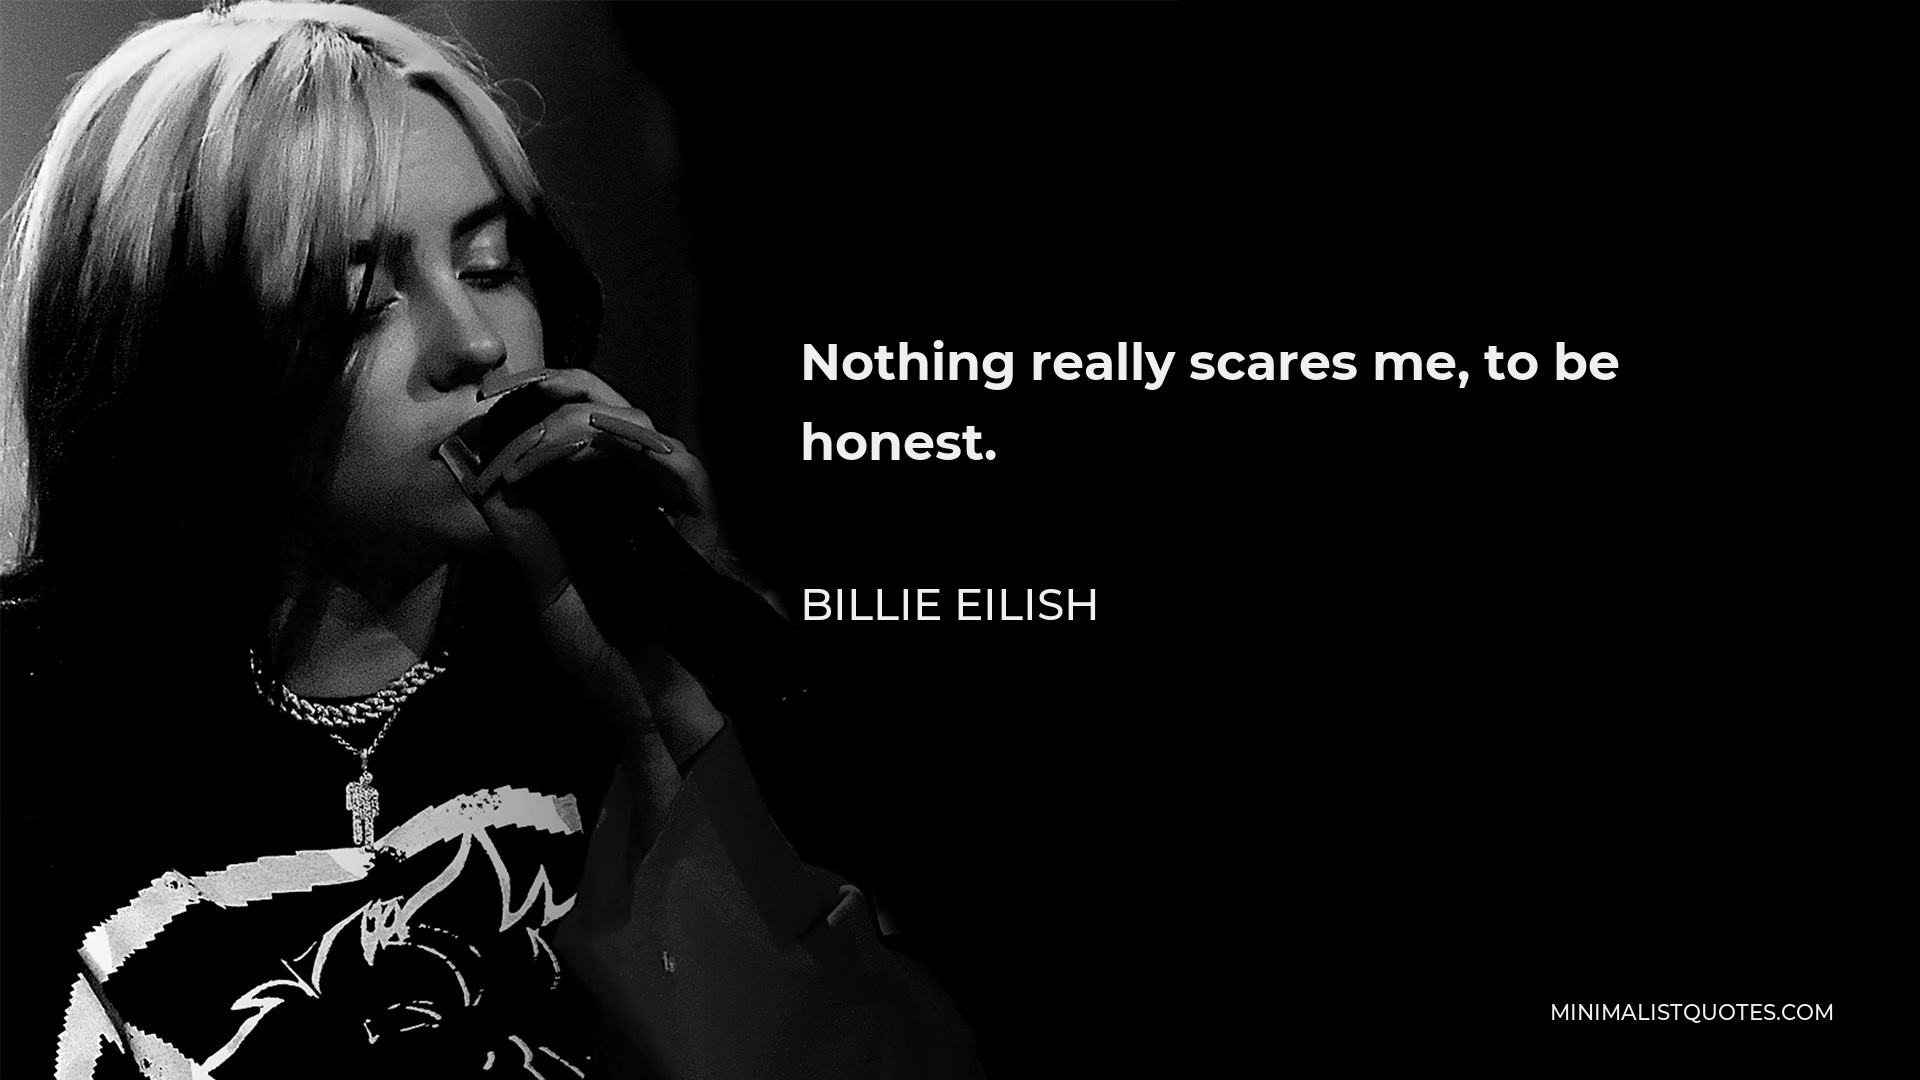 Billie Eilish Quote - Nothing really scares me, to be honest.